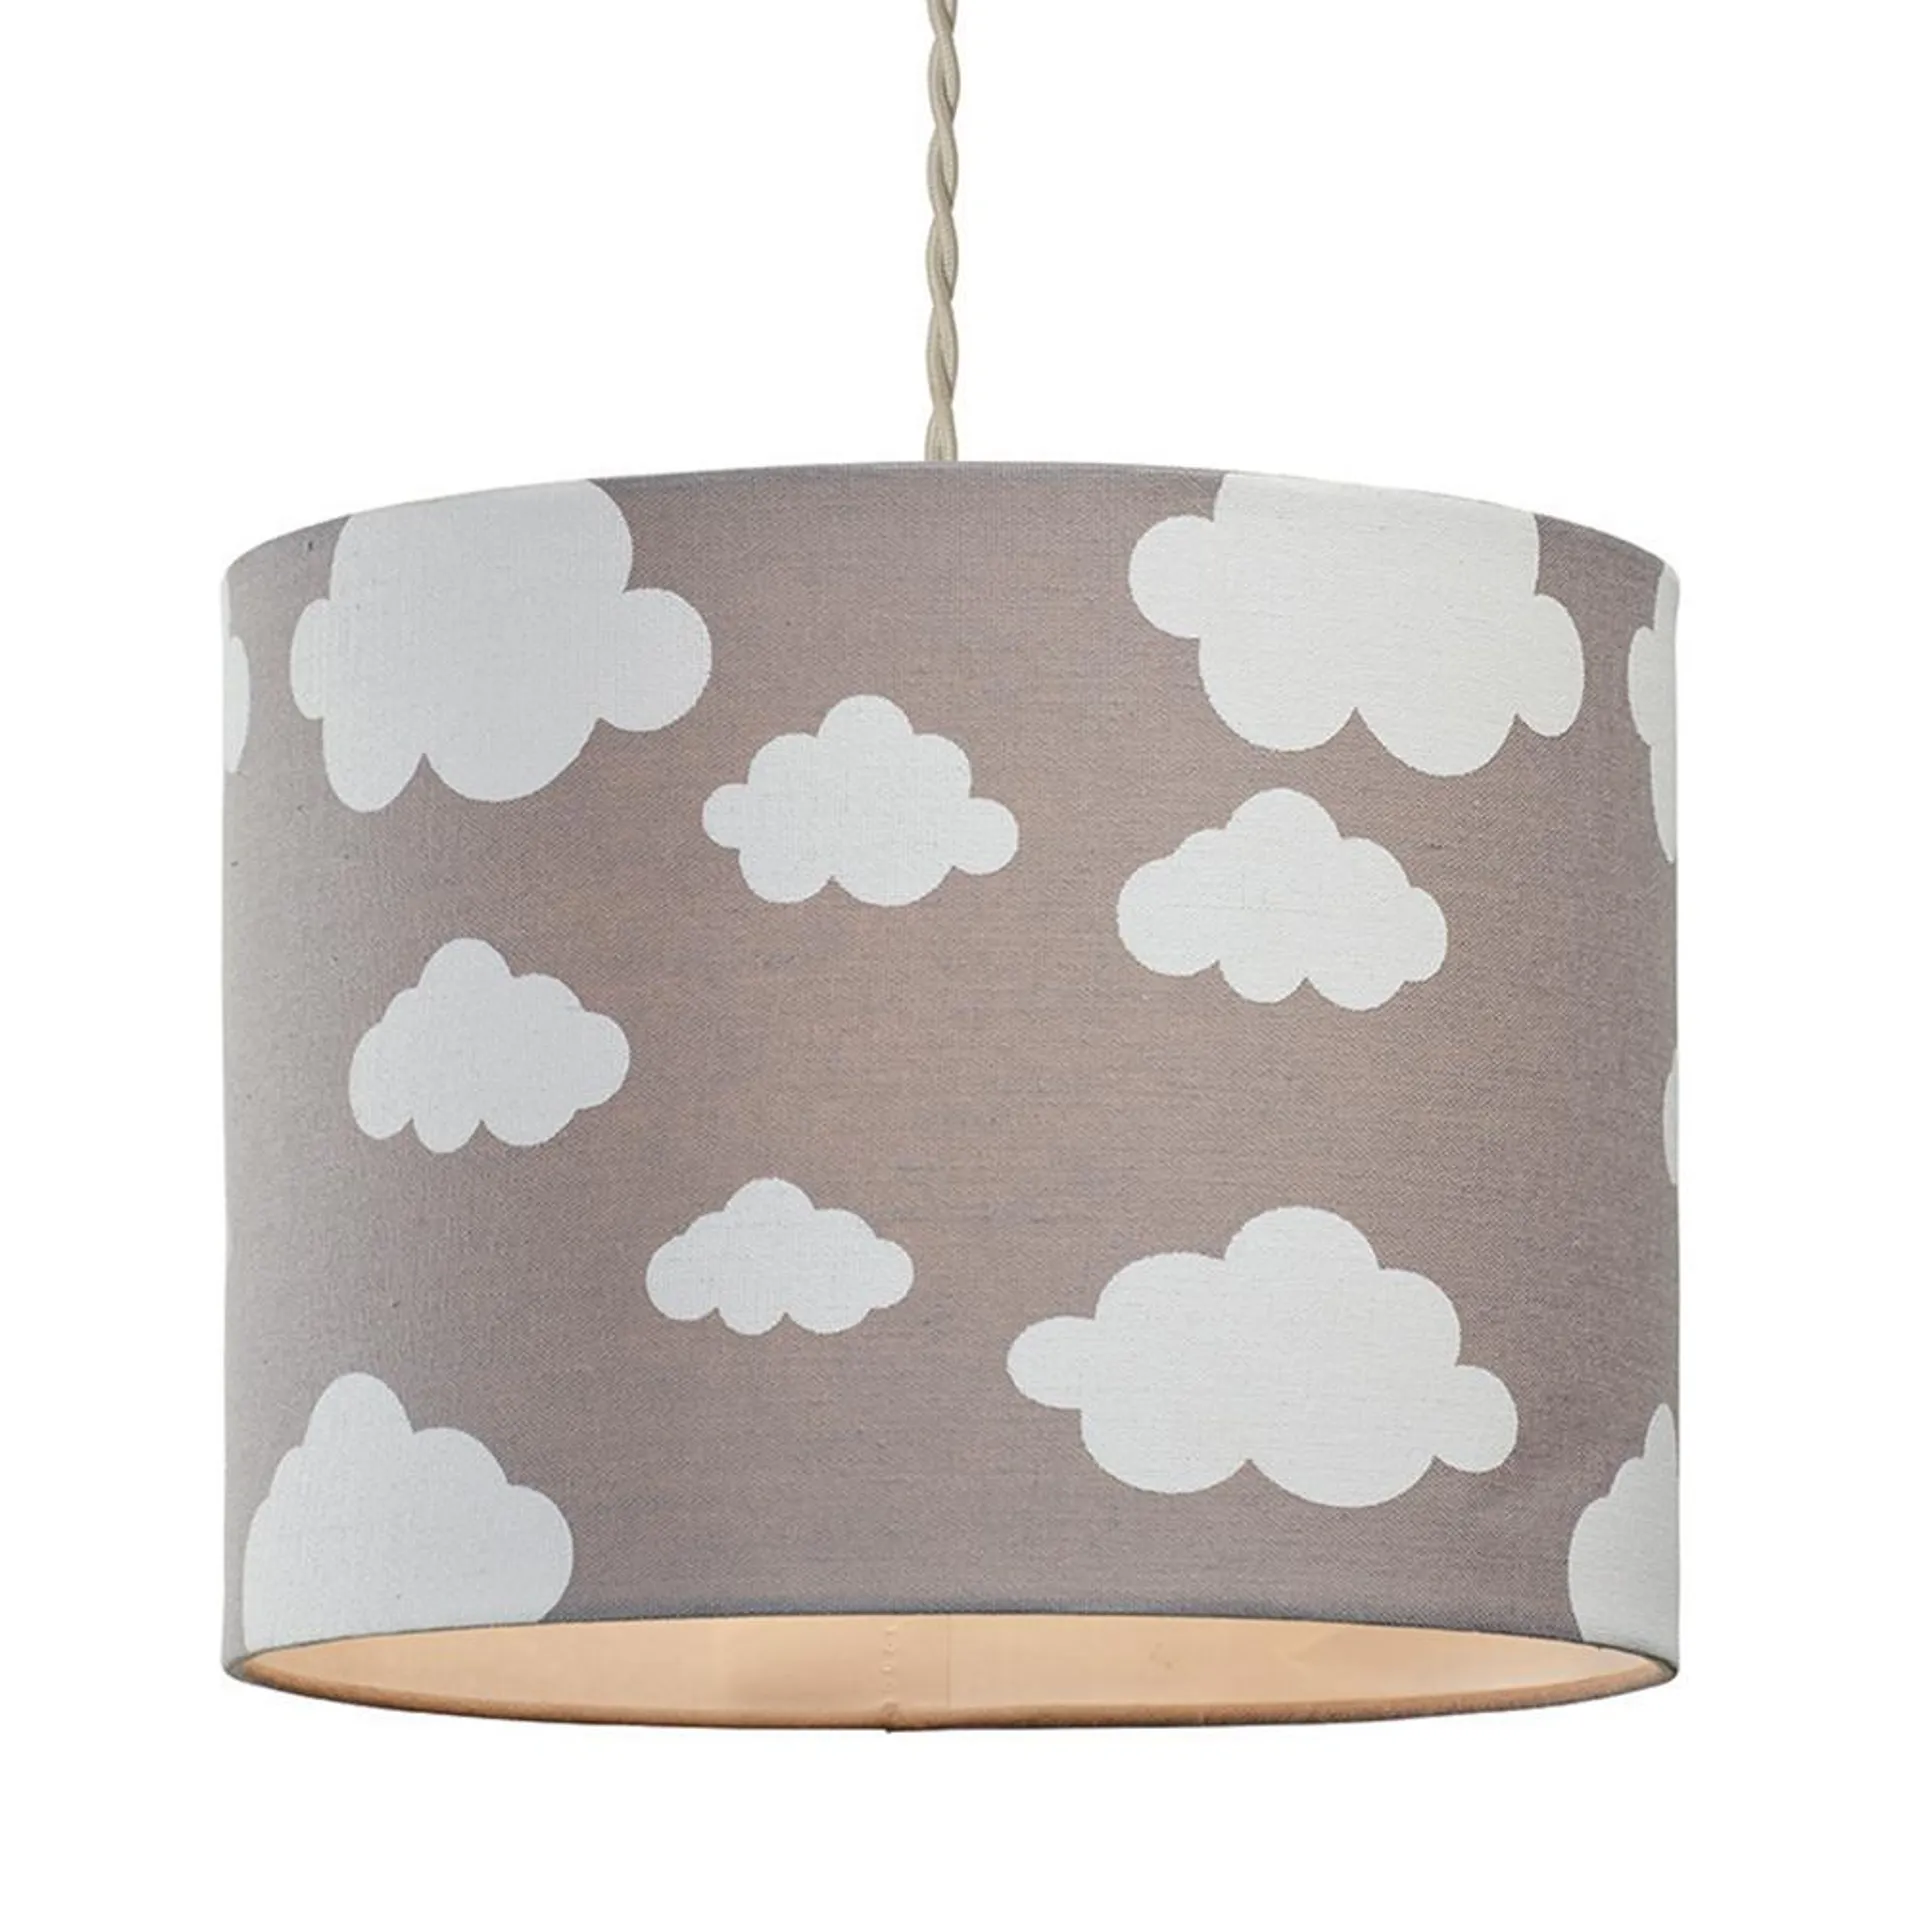 Cloudy Day Pendant Shade Grey